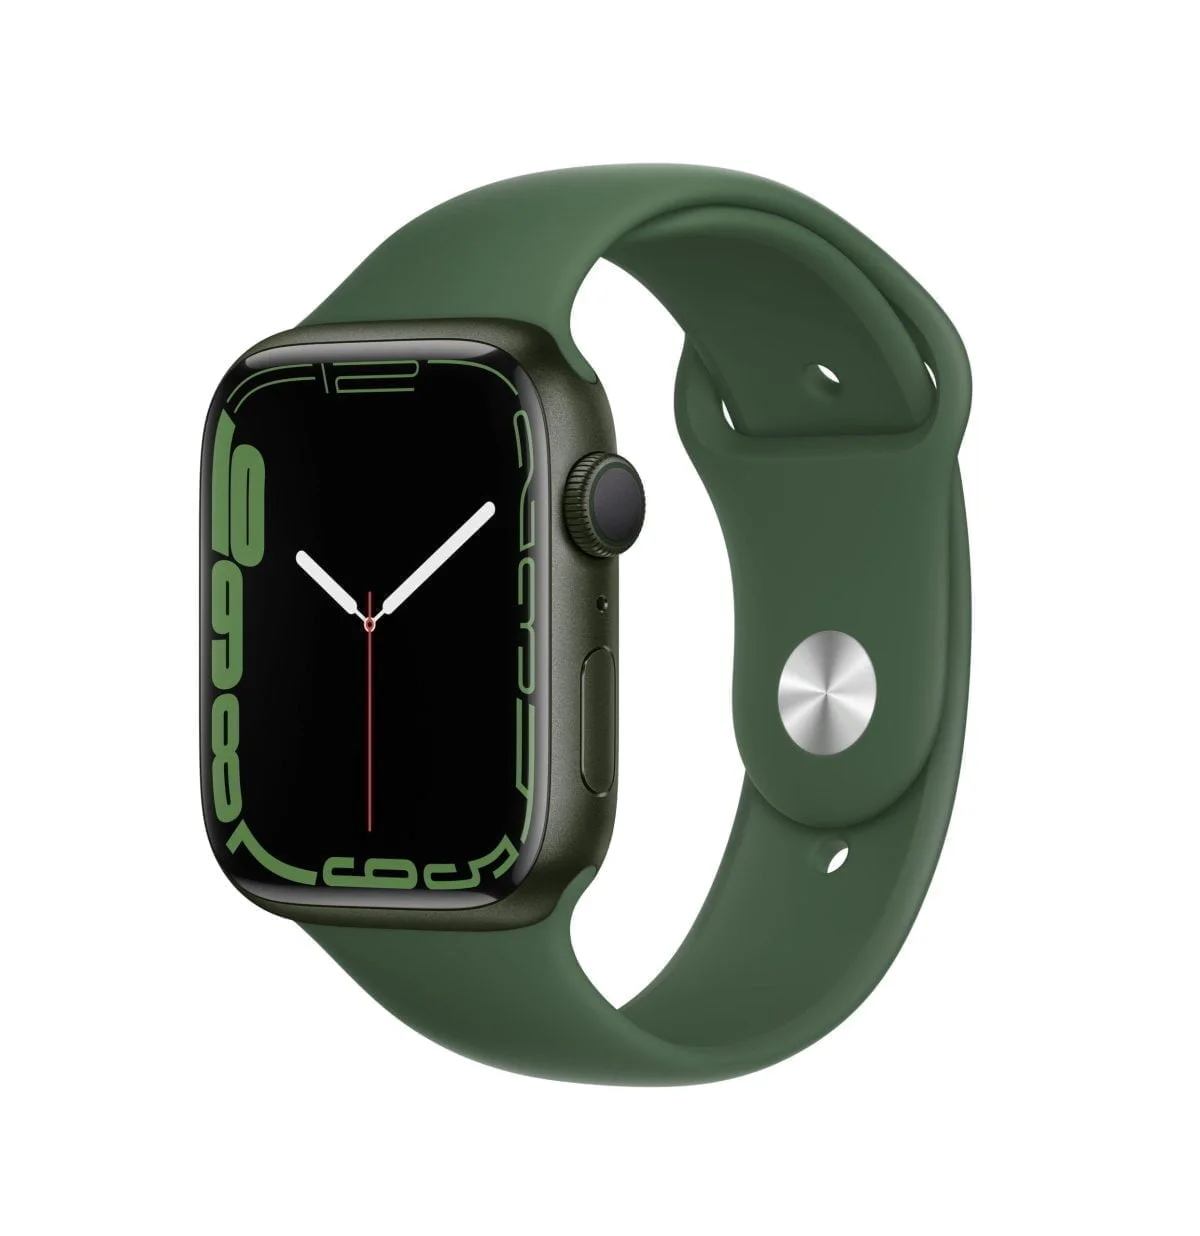 6215941 Sd Scaled Apple &Amp;Lt;H1&Amp;Gt;Apple Watch Series 7 (Gps) 45Mm Green Aluminum Case With Clover Sport Band - Green&Amp;Lt;/H1&Amp;Gt; &Amp;Lt;H2&Amp;Gt;Model : Mkn73&Amp;Lt;/H2&Amp;Gt; &Amp;Lt;Div Class=&Amp;Quot;Long-Description-Container Body-Copy &Amp;Quot;&Amp;Gt; &Amp;Lt;Div Class=&Amp;Quot;Html-Fragment&Amp;Quot;&Amp;Gt; &Amp;Lt;Div&Amp;Gt; &Amp;Lt;Div&Amp;Gt;The Largest, Most Advanced Always-On Retina Display Yet Makes Everything You Do With Your Apple Watch Series 7 Bigger And Better. Series 7 Is The Most Durable Apple Watch Ever Built, With An Even More Crack-Resistant Front Crystal. Advanced Features Let You Measure Your Blood Oxygen Level,¹ Take An Ecg Anytime, And Access Mindfulness And Sleep Tracking Apps. You Can Also Track Dozens Of Workouts, Including New Tai Chi And Pilates.&Amp;Lt;/Div&Amp;Gt; &Amp;Lt;/Div&Amp;Gt; &Amp;Lt;/Div&Amp;Gt; &Amp;Lt;/Div&Amp;Gt; Apple Watch Series 7 Apple Watch Series 7 (Gps) 45Mm - Green